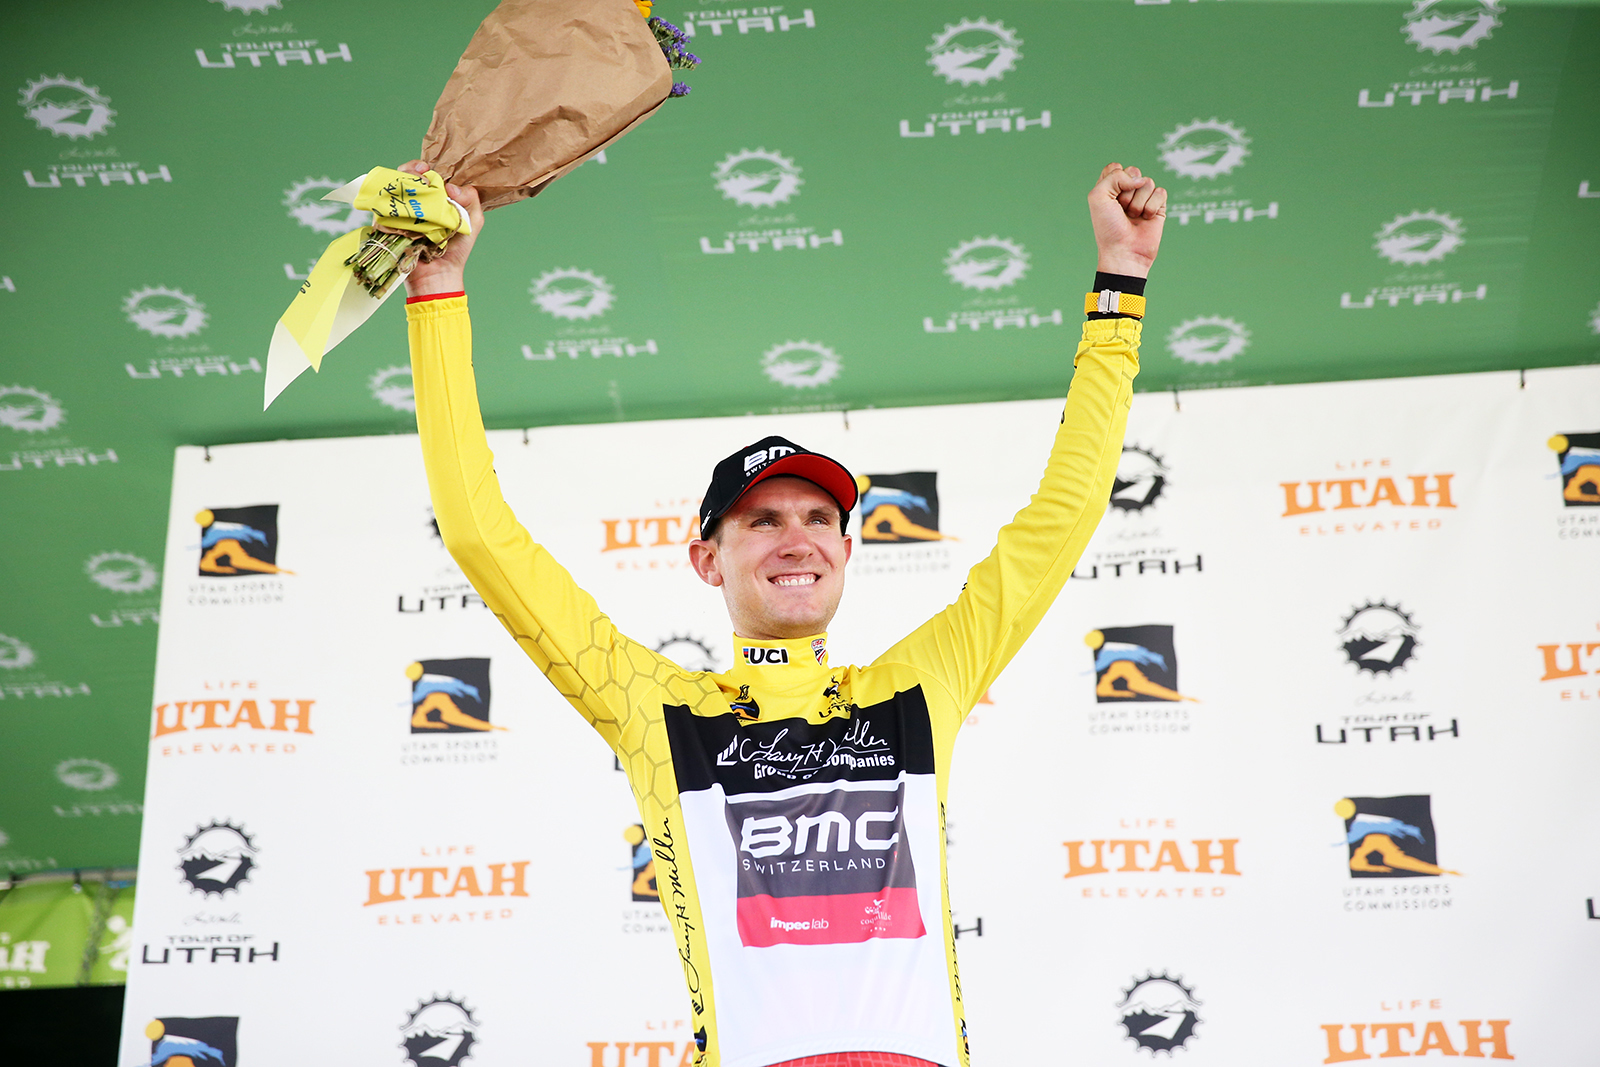 BMC’s Tejay Van Garderen in the yellow. 2018 Tour of Utah Team Prologue, August 6, 2018, St. George, Utah. Photo by Cathy Fegan-Kim, cottonsoxphotography.net